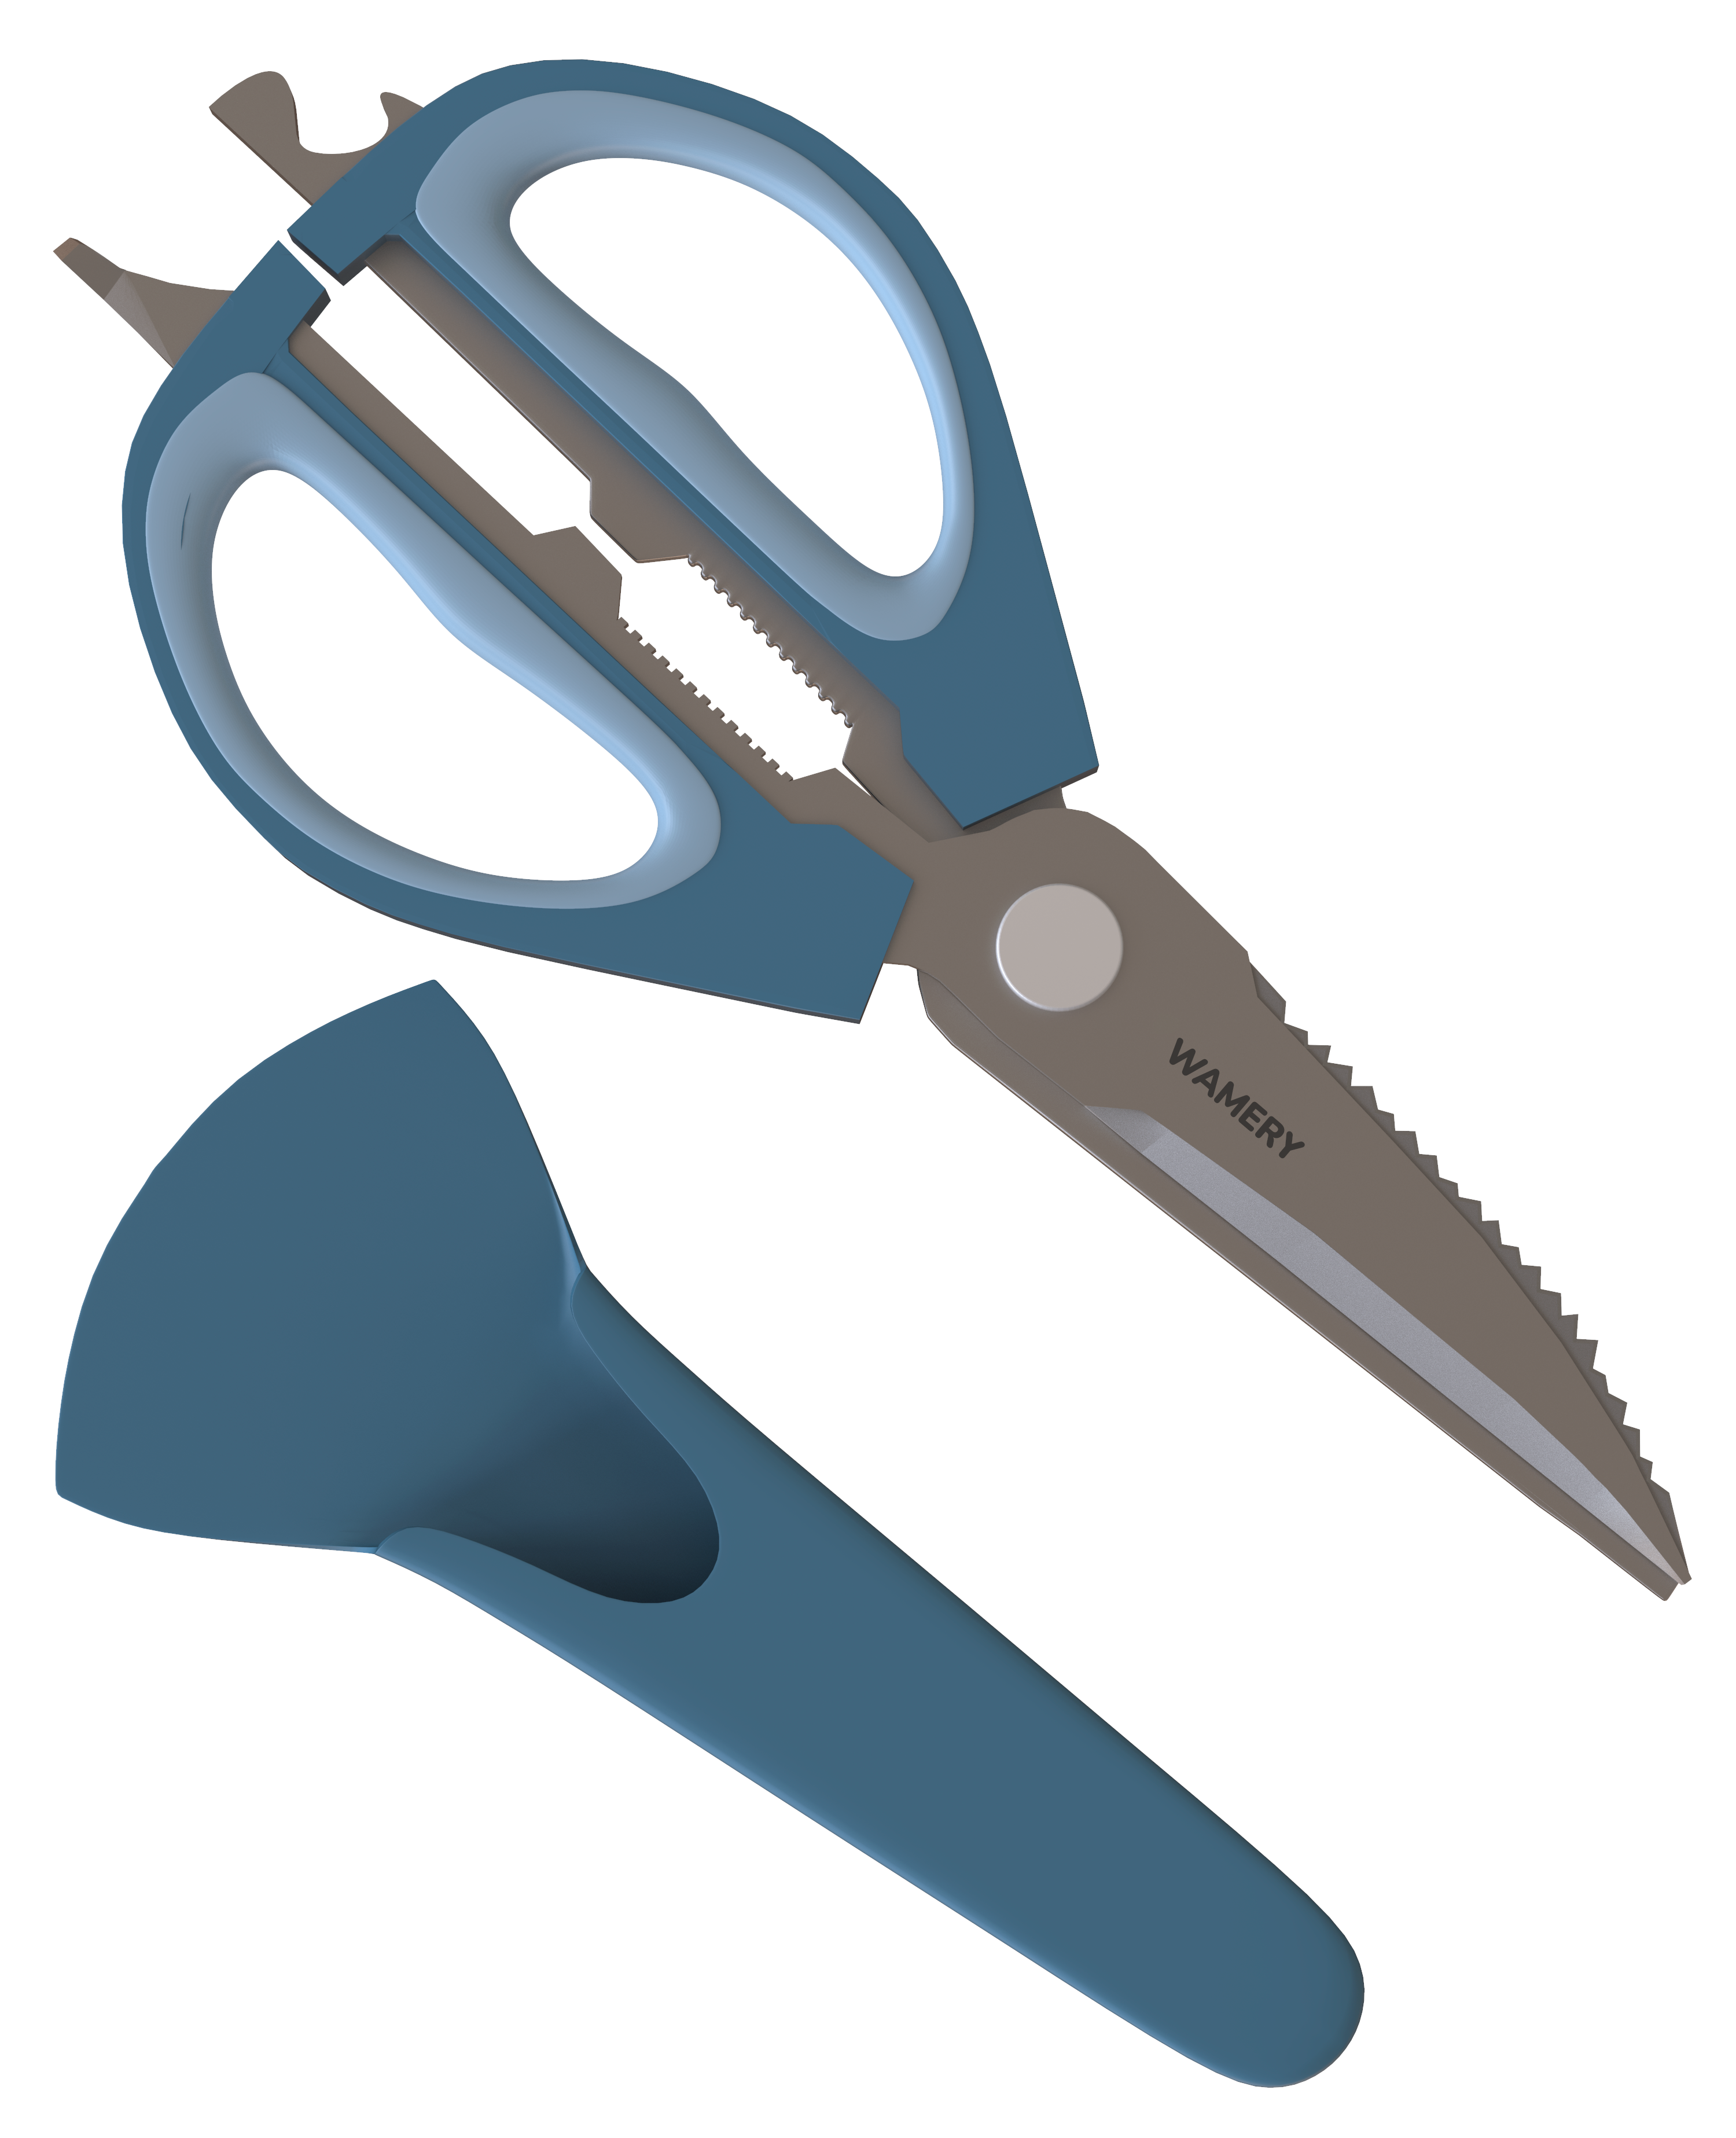 Utility Scissors with Magnetic Holder - Item #ZIP1585 -   Custom Printed Promotional Products